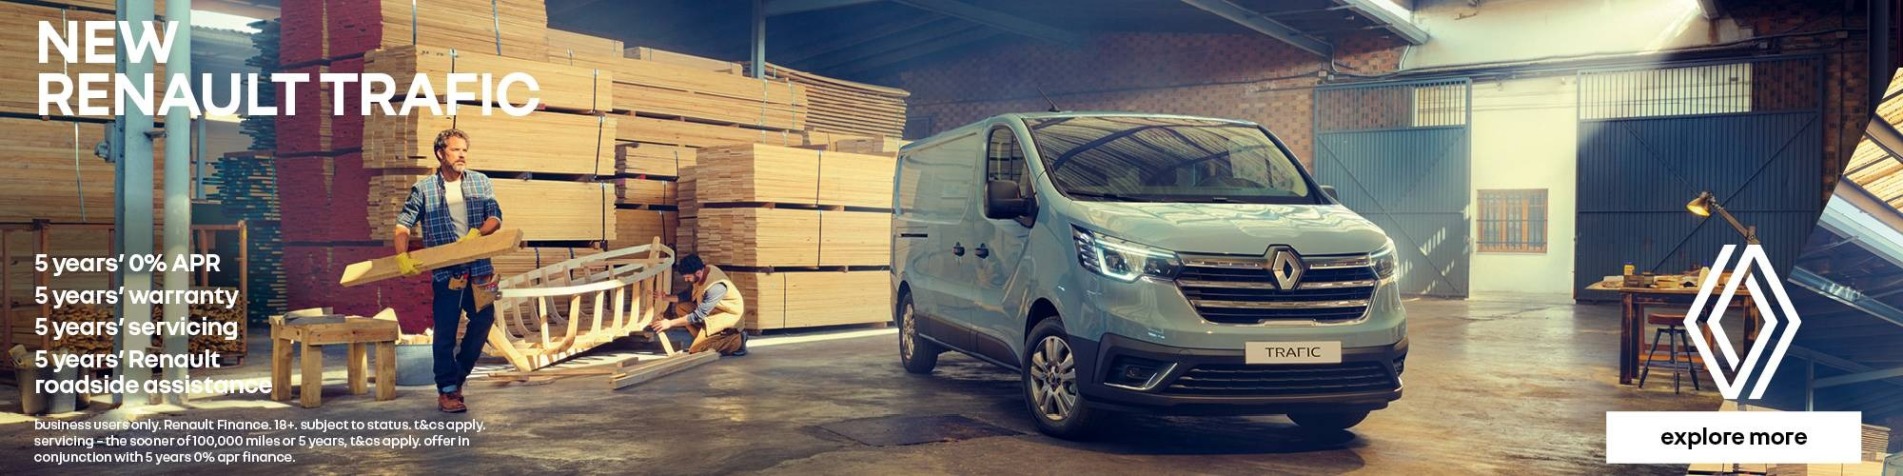 New Renault Trafic Banner